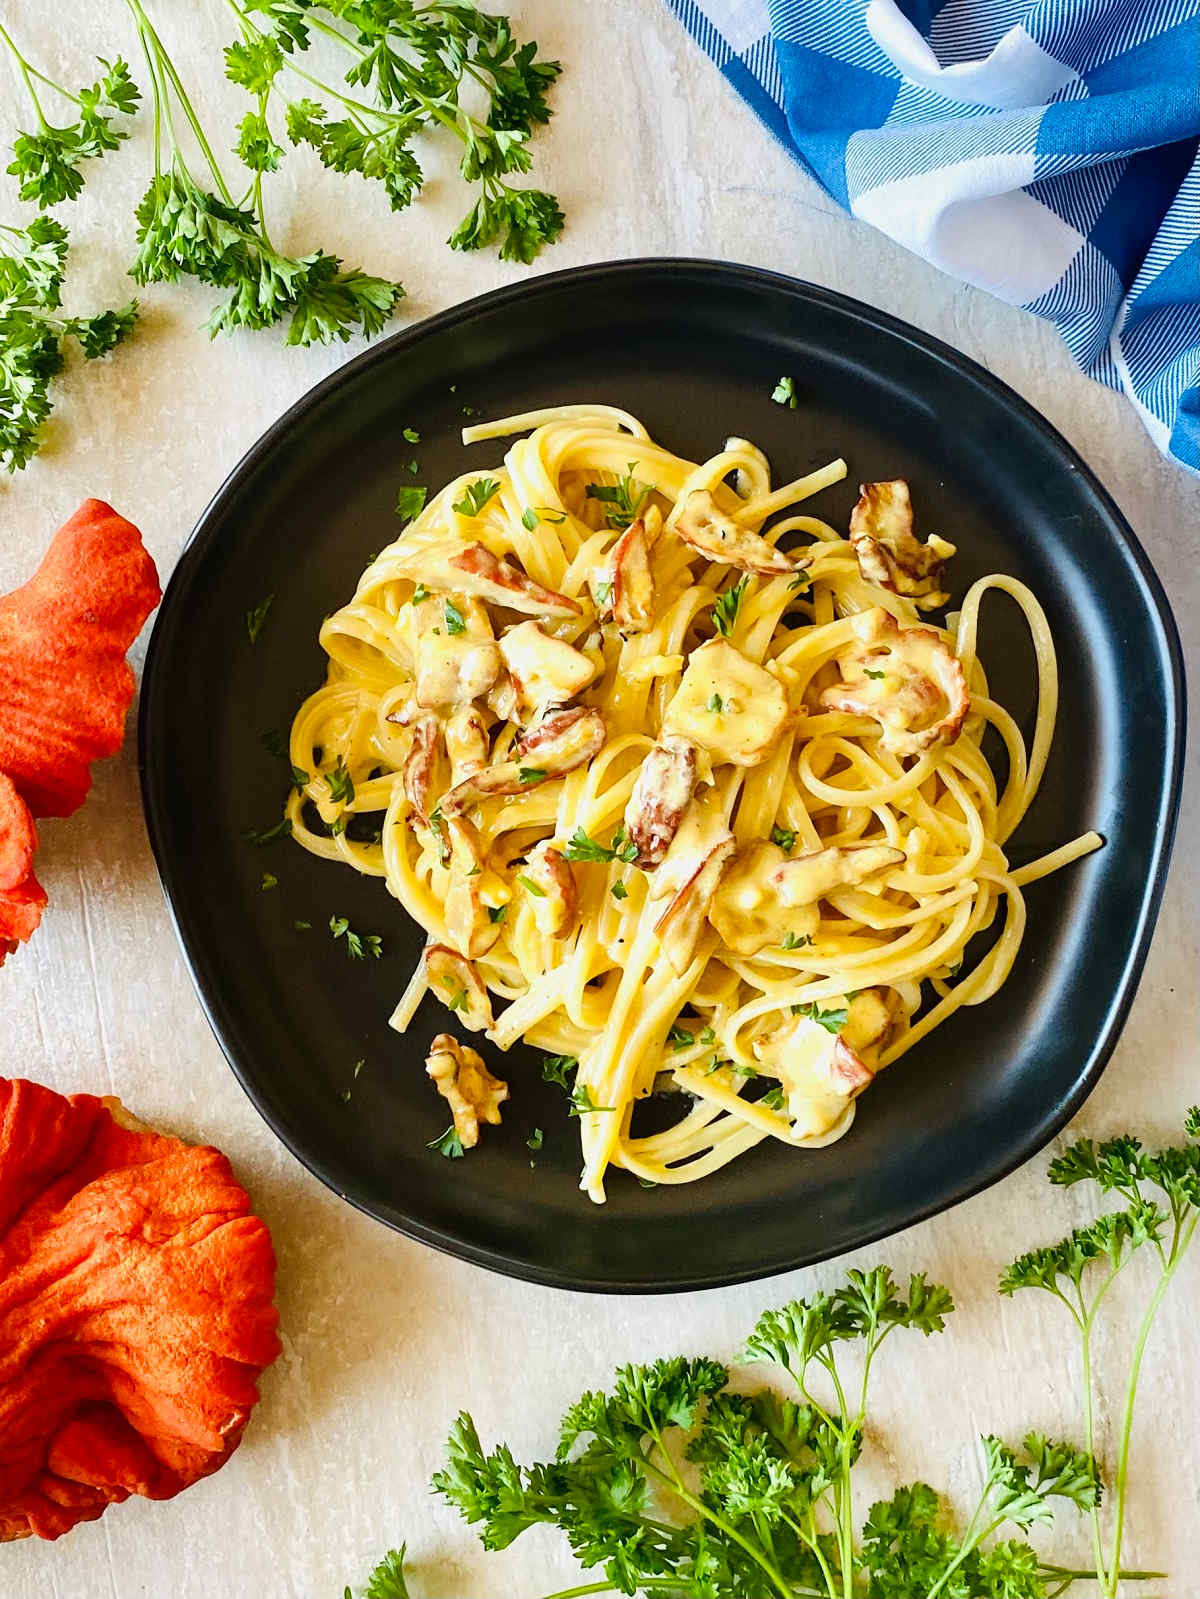 lobster mushroom pasta recipe on a black plate next to fresh lobster mushrooms, parsley and a blue napkin